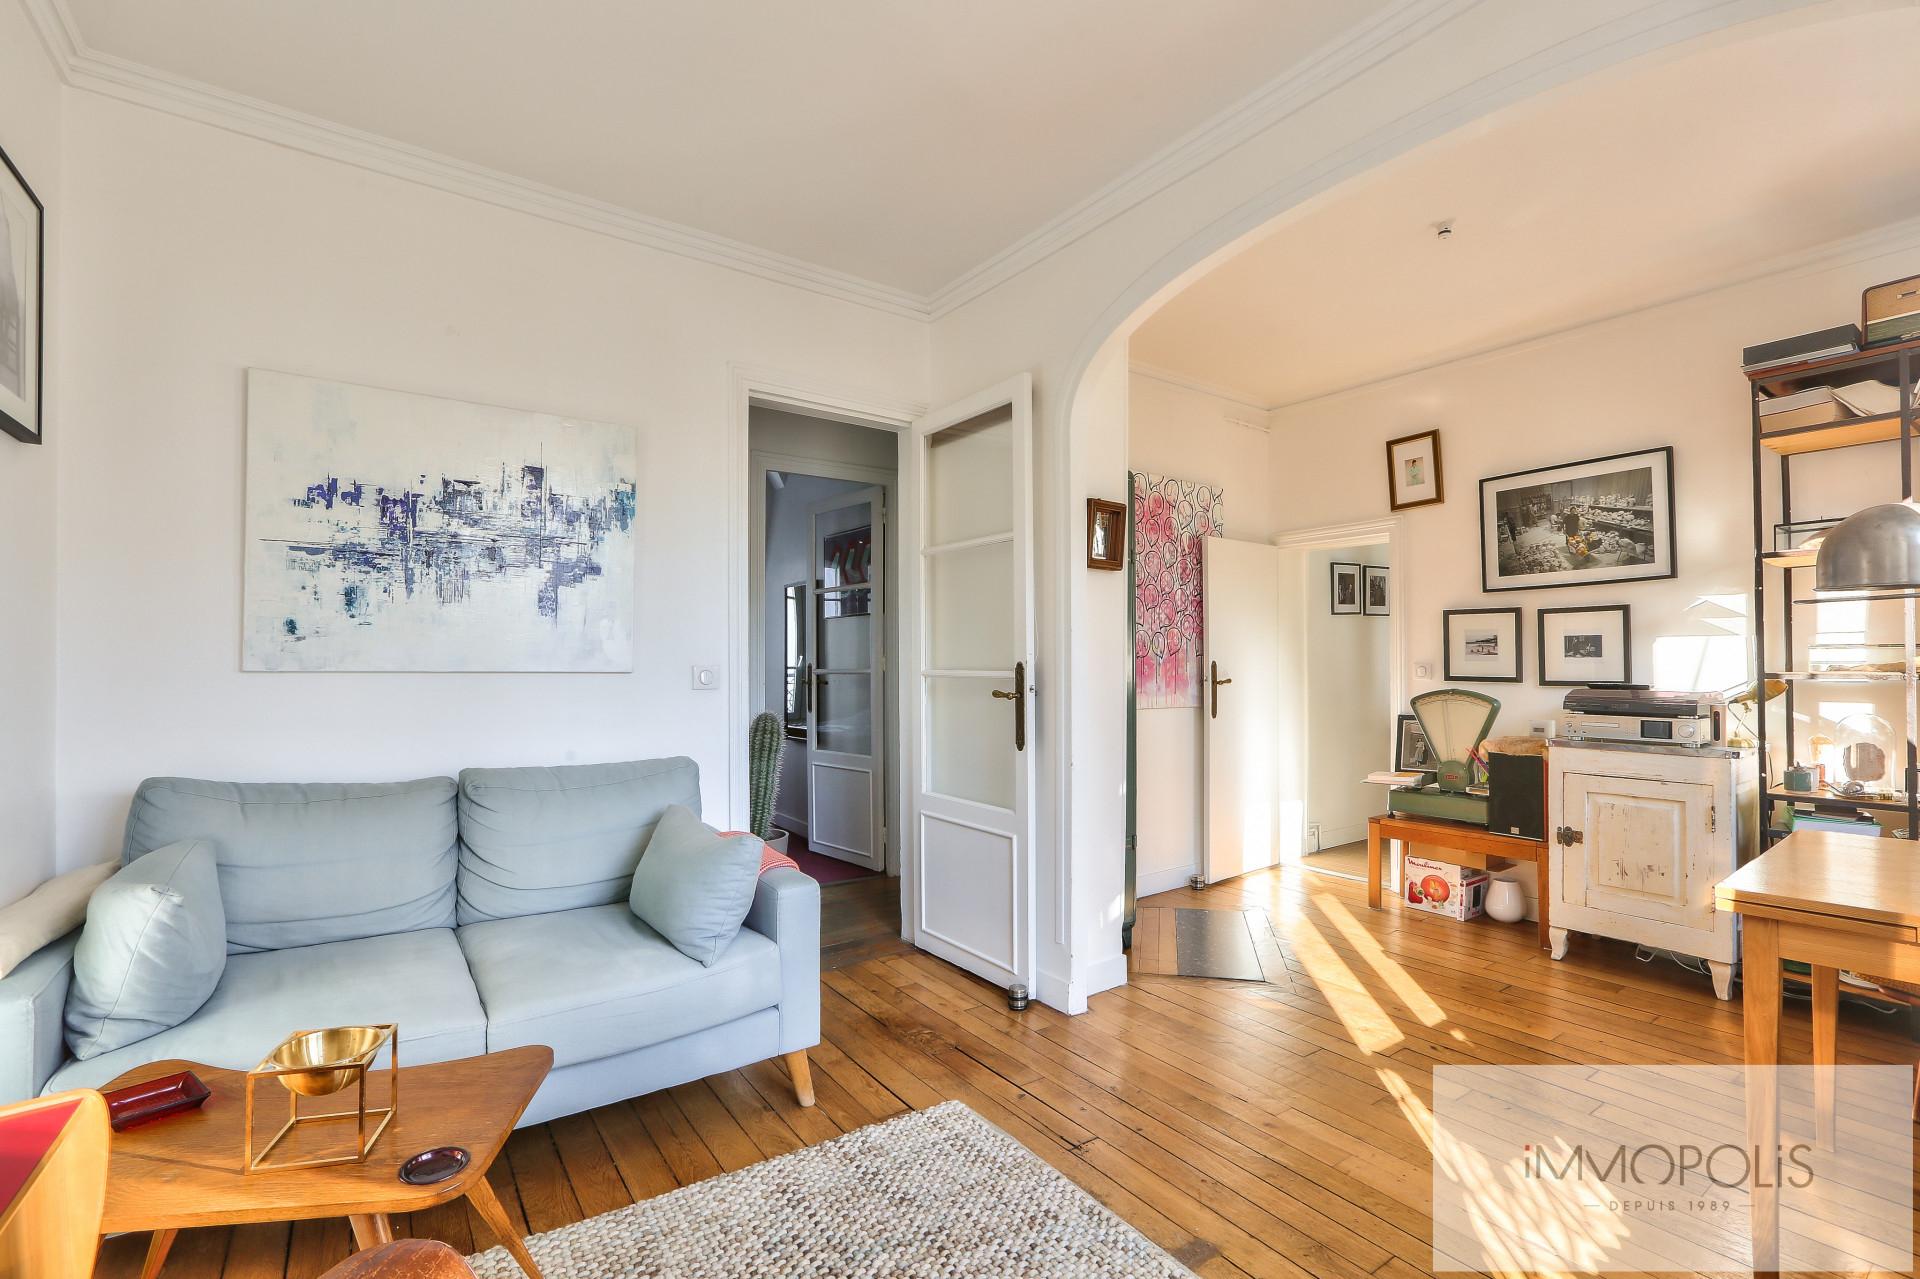 Charming apartment in Montmartre on top floor with unobstructed view. 2